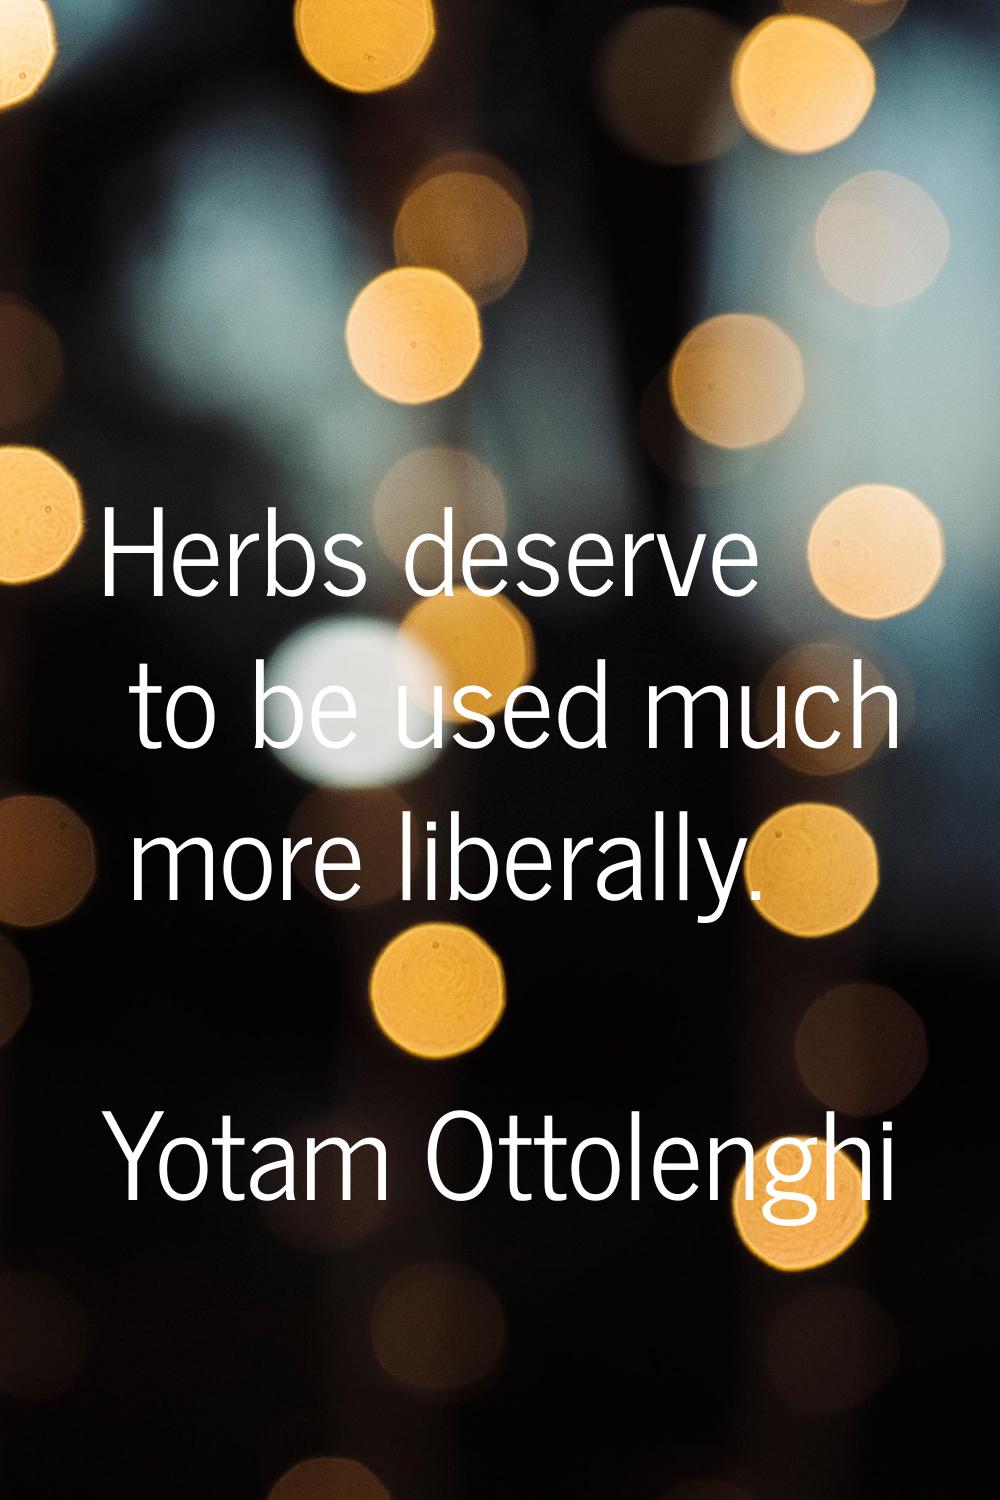 Herbs deserve to be used much more liberally.